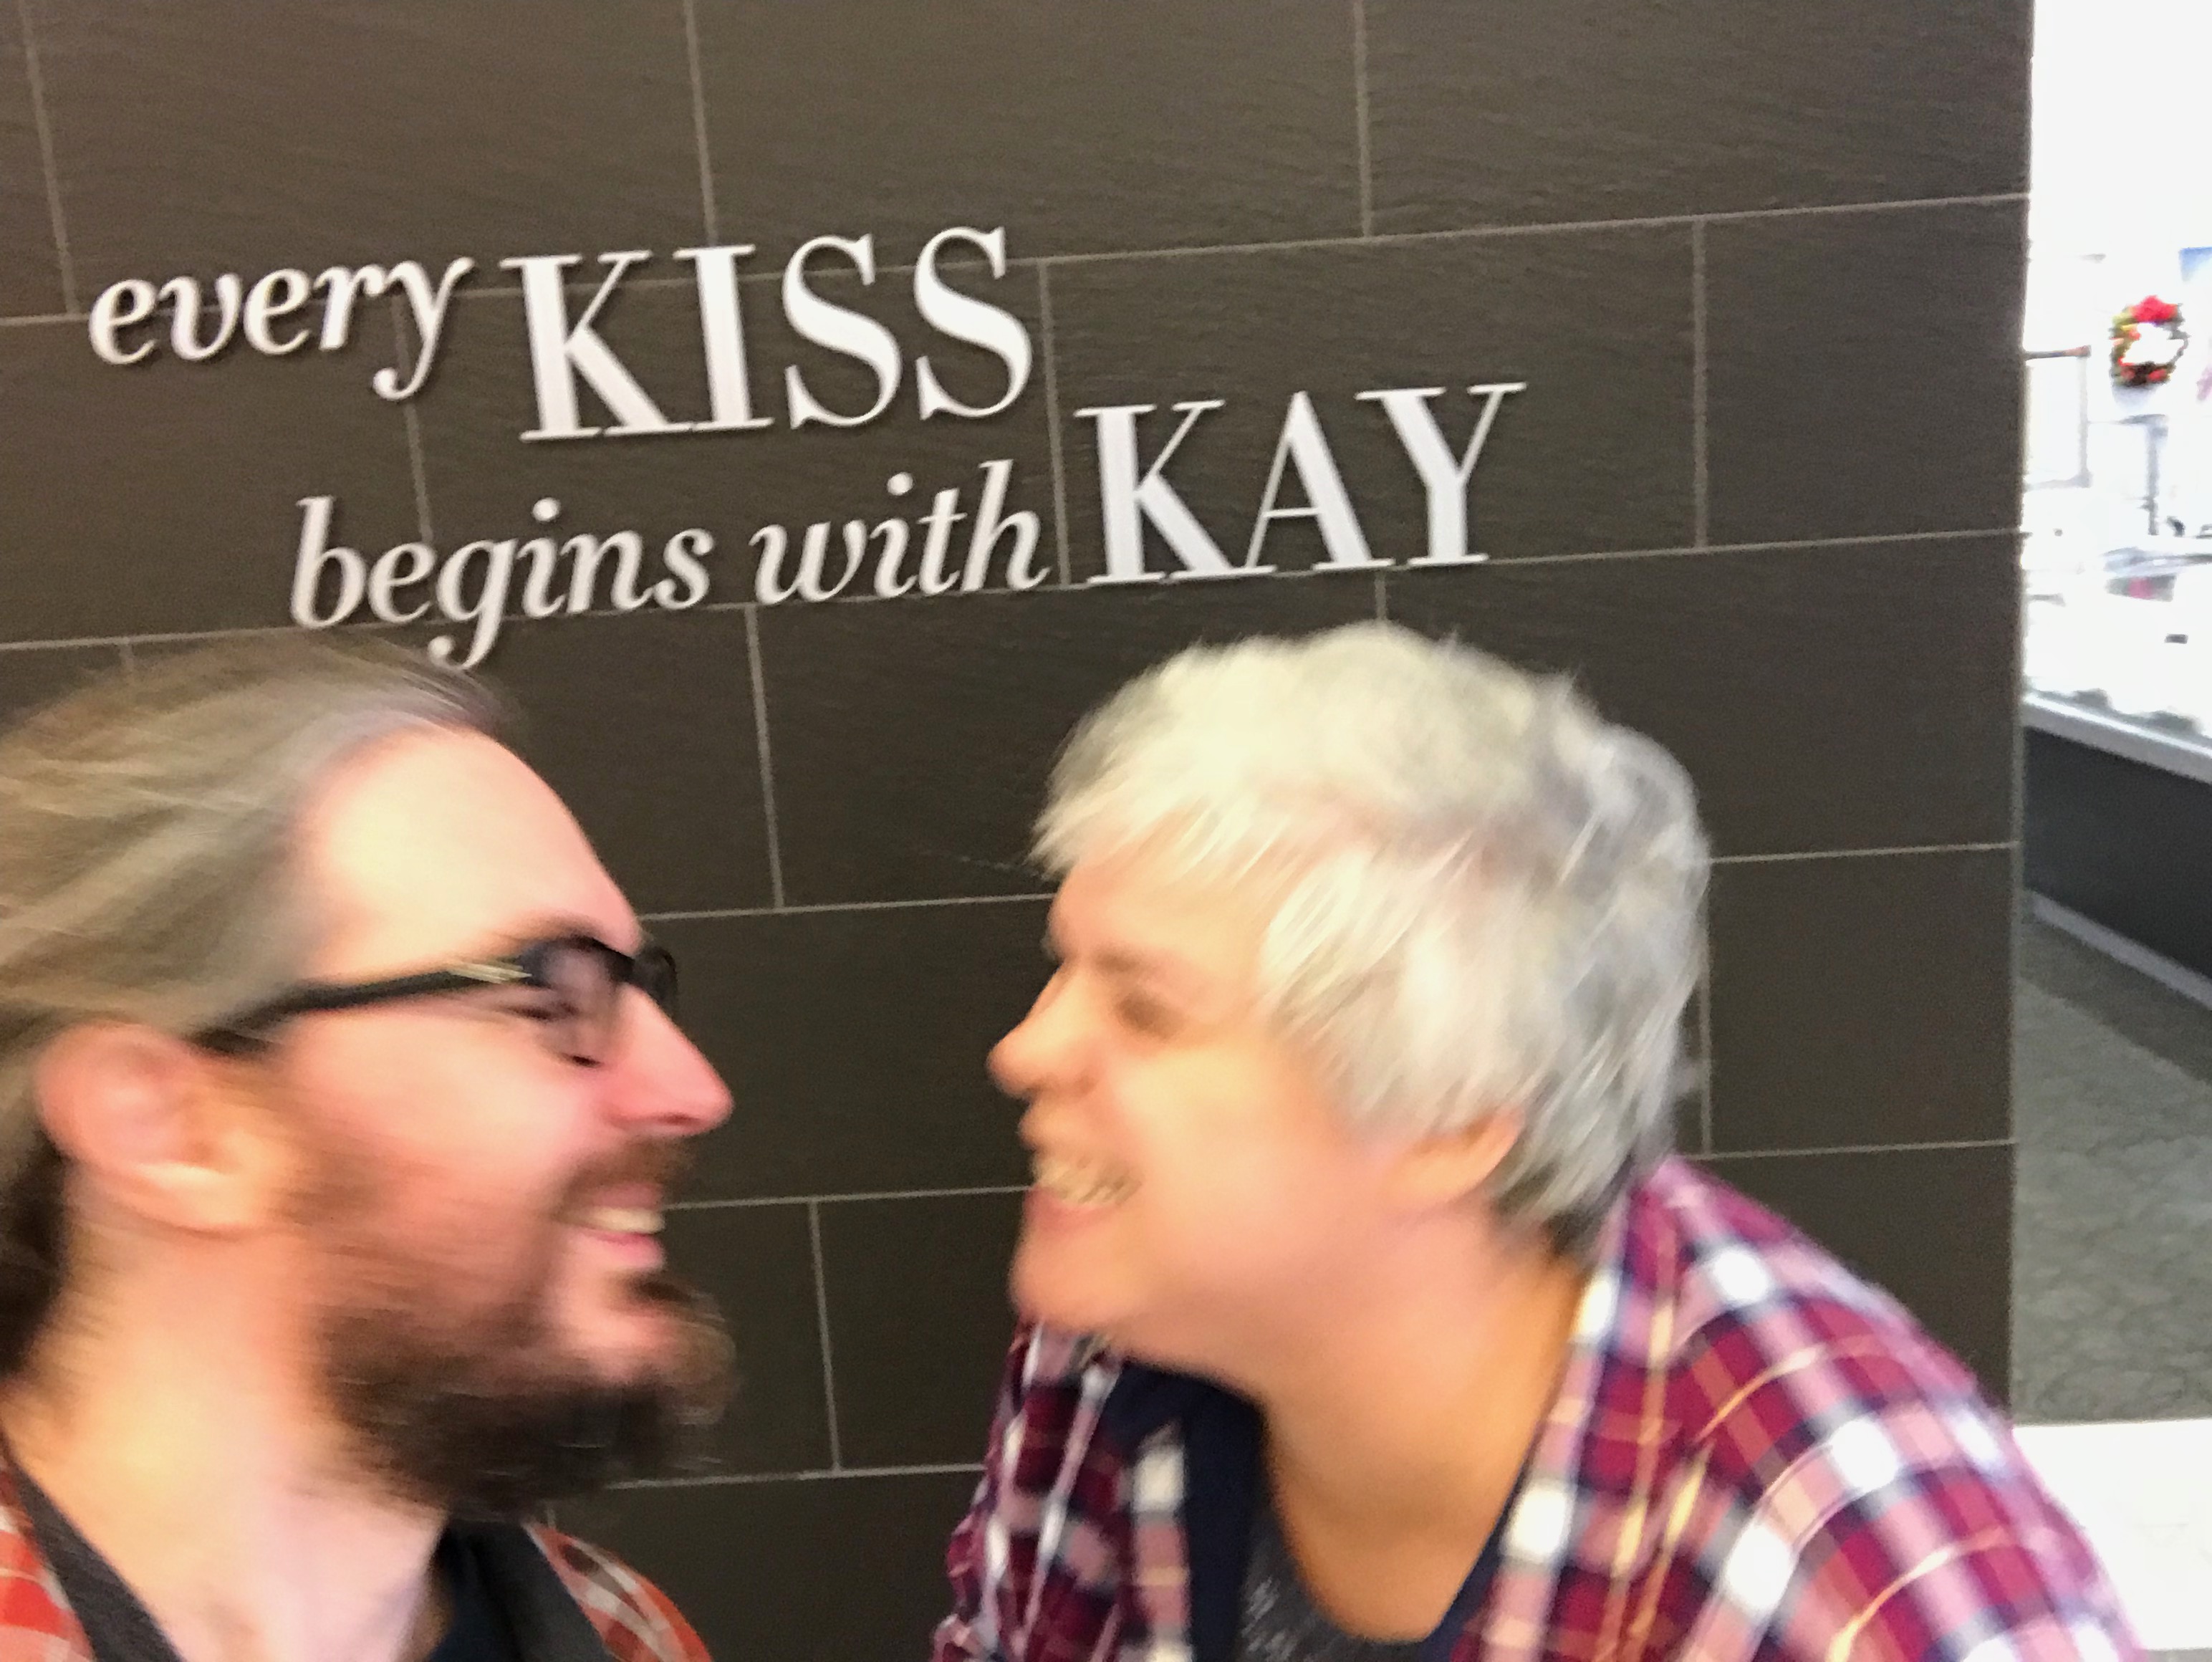 every kiss begins with kay, and Im kay so…